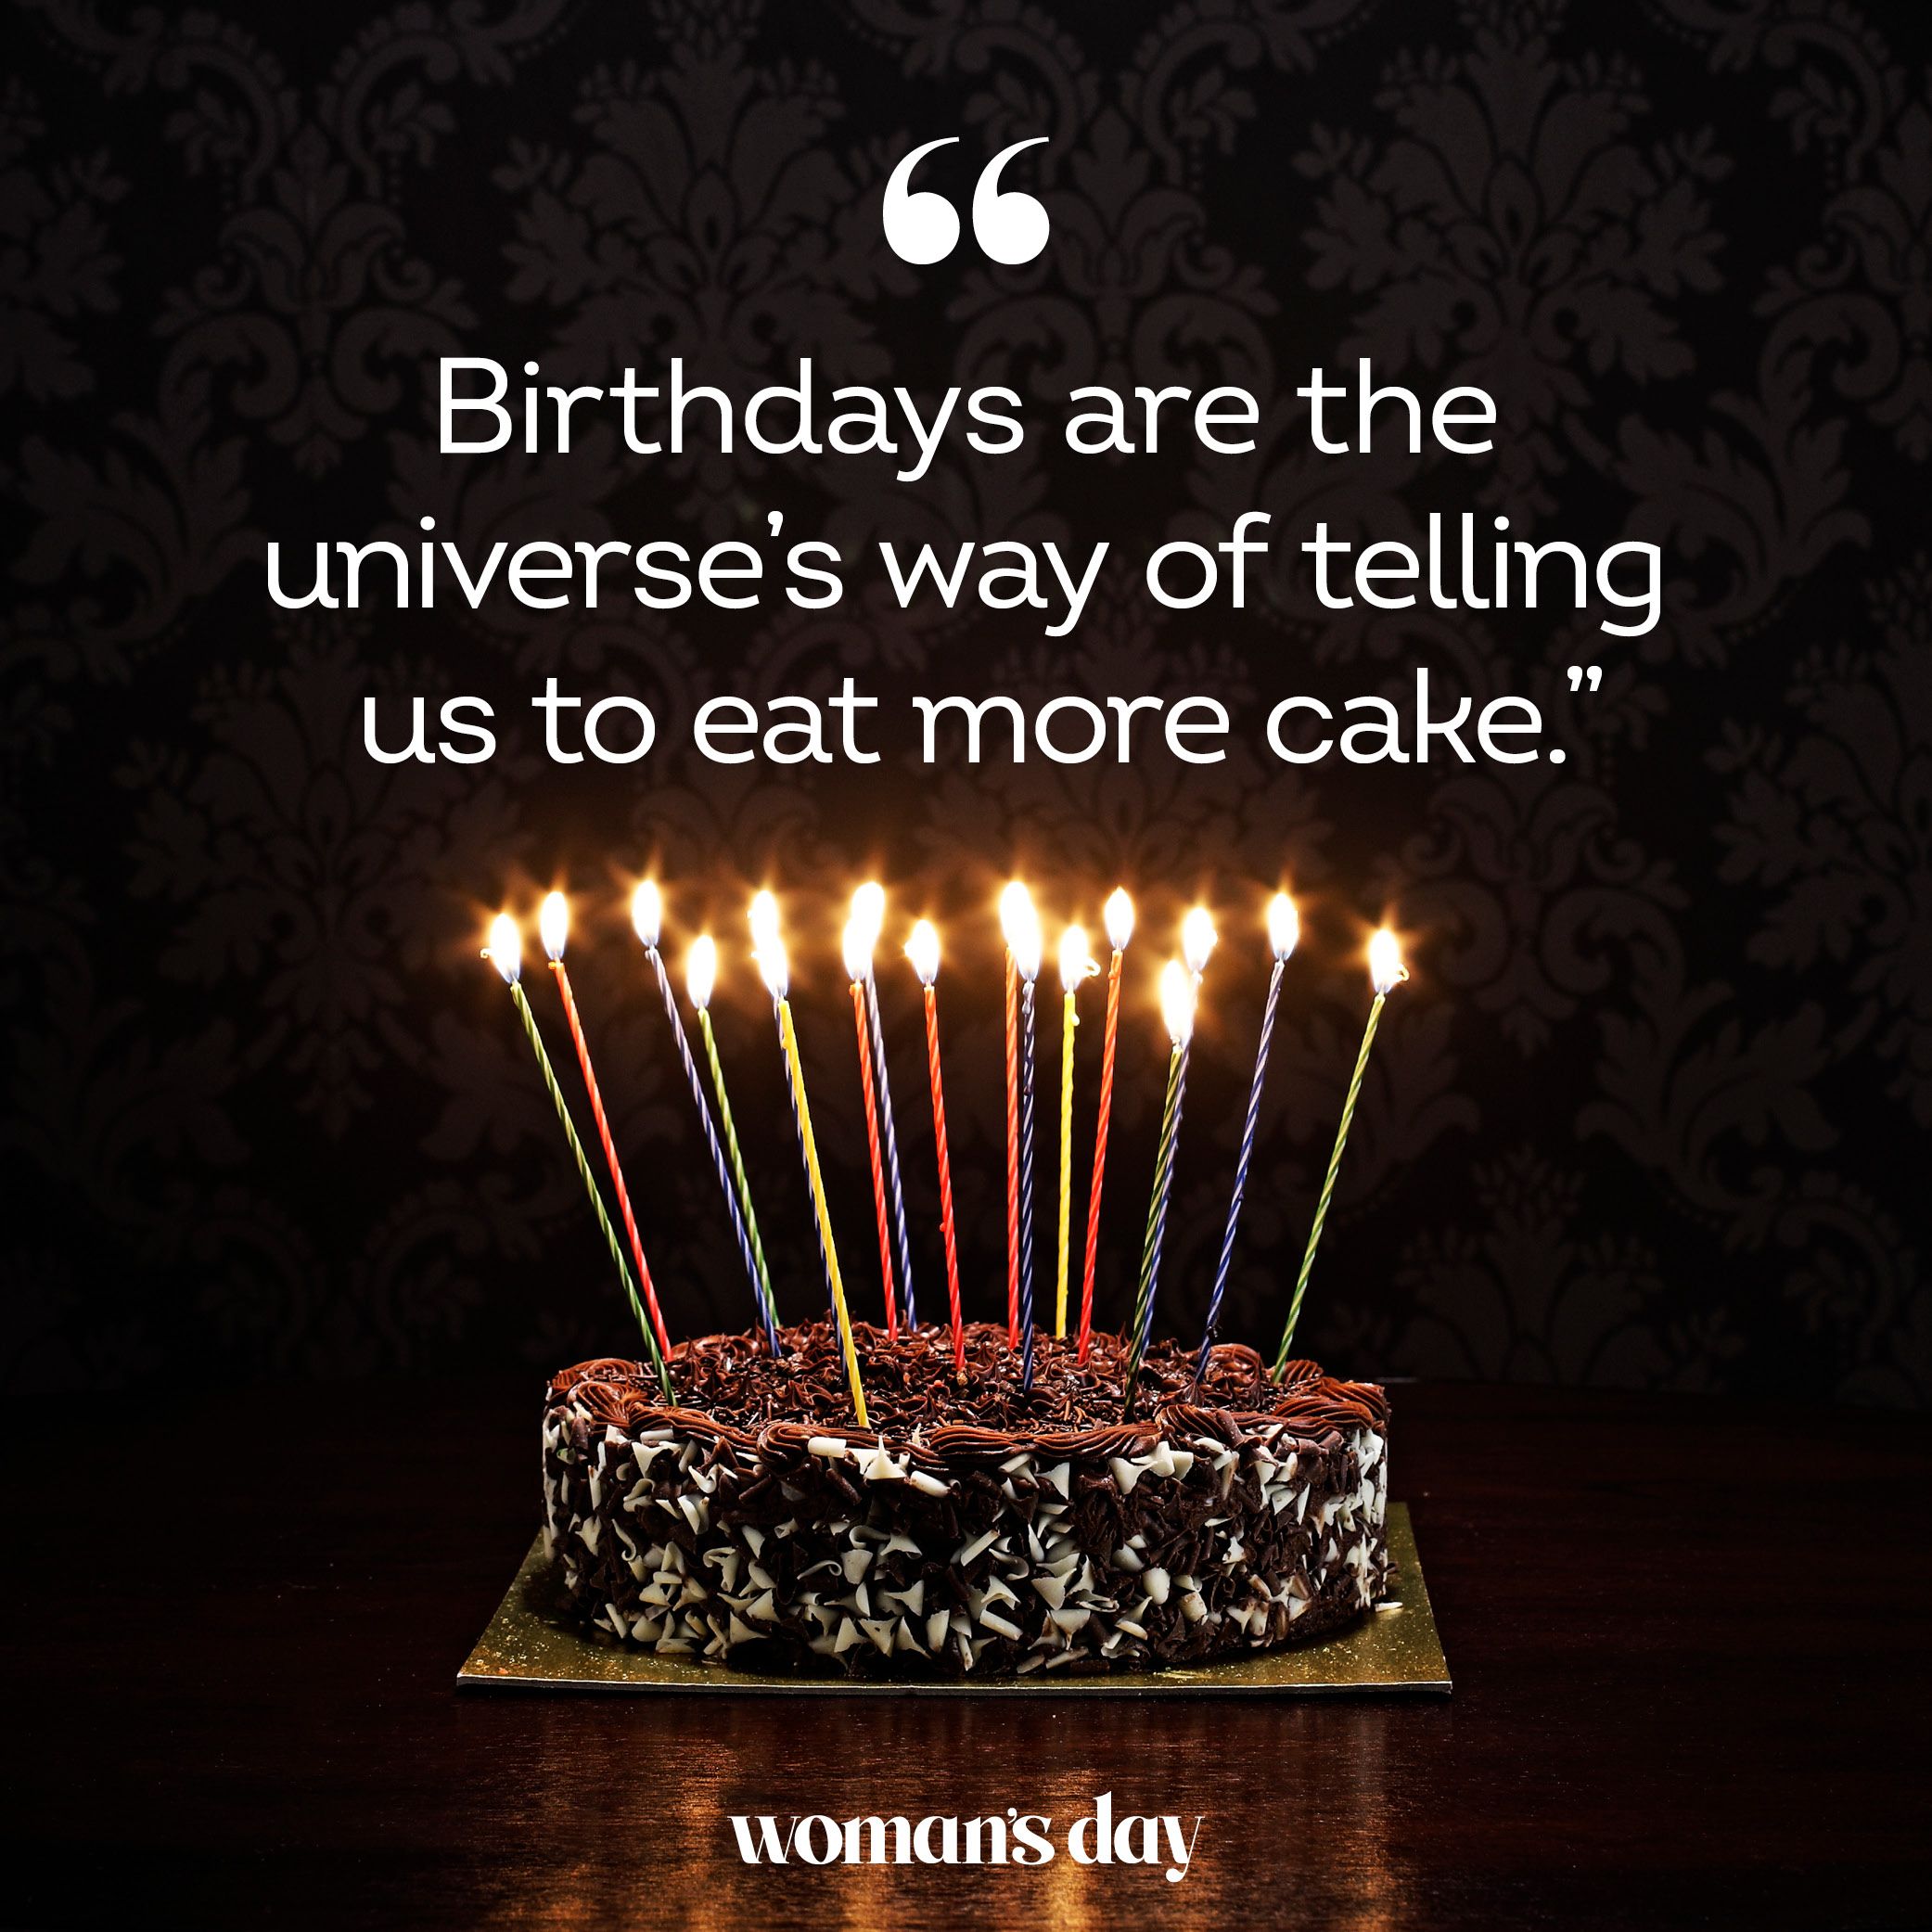 witty birthday quotes